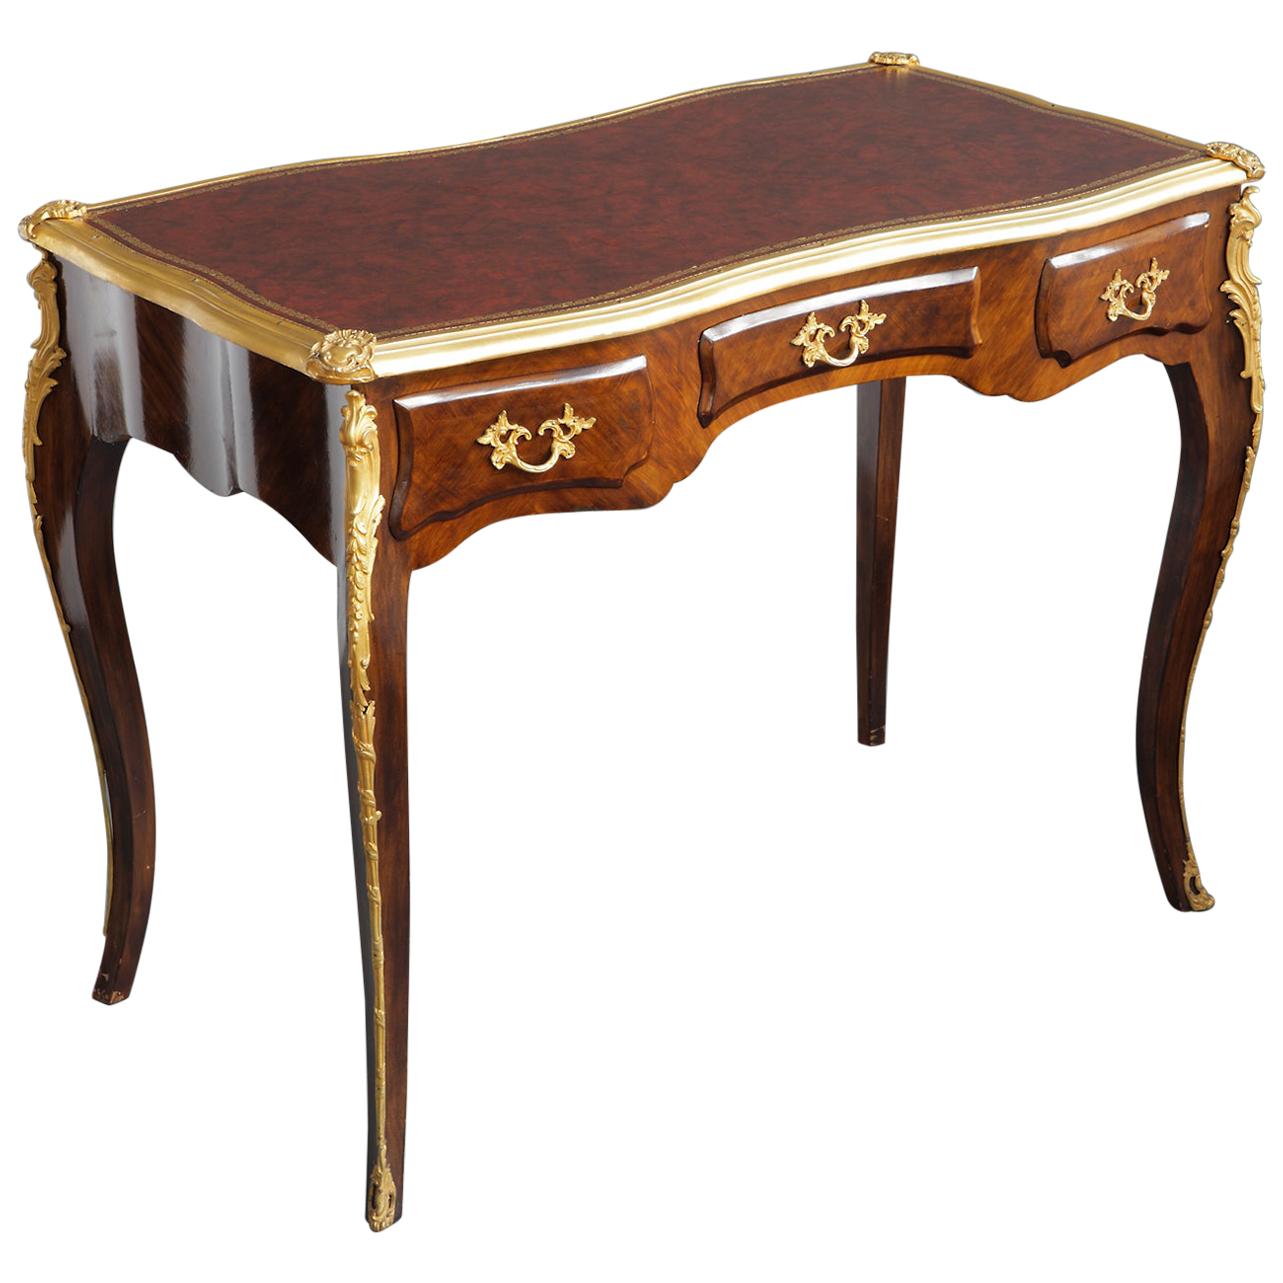 Antique French Gilt Bronze-Mounted table / Desk For Sale